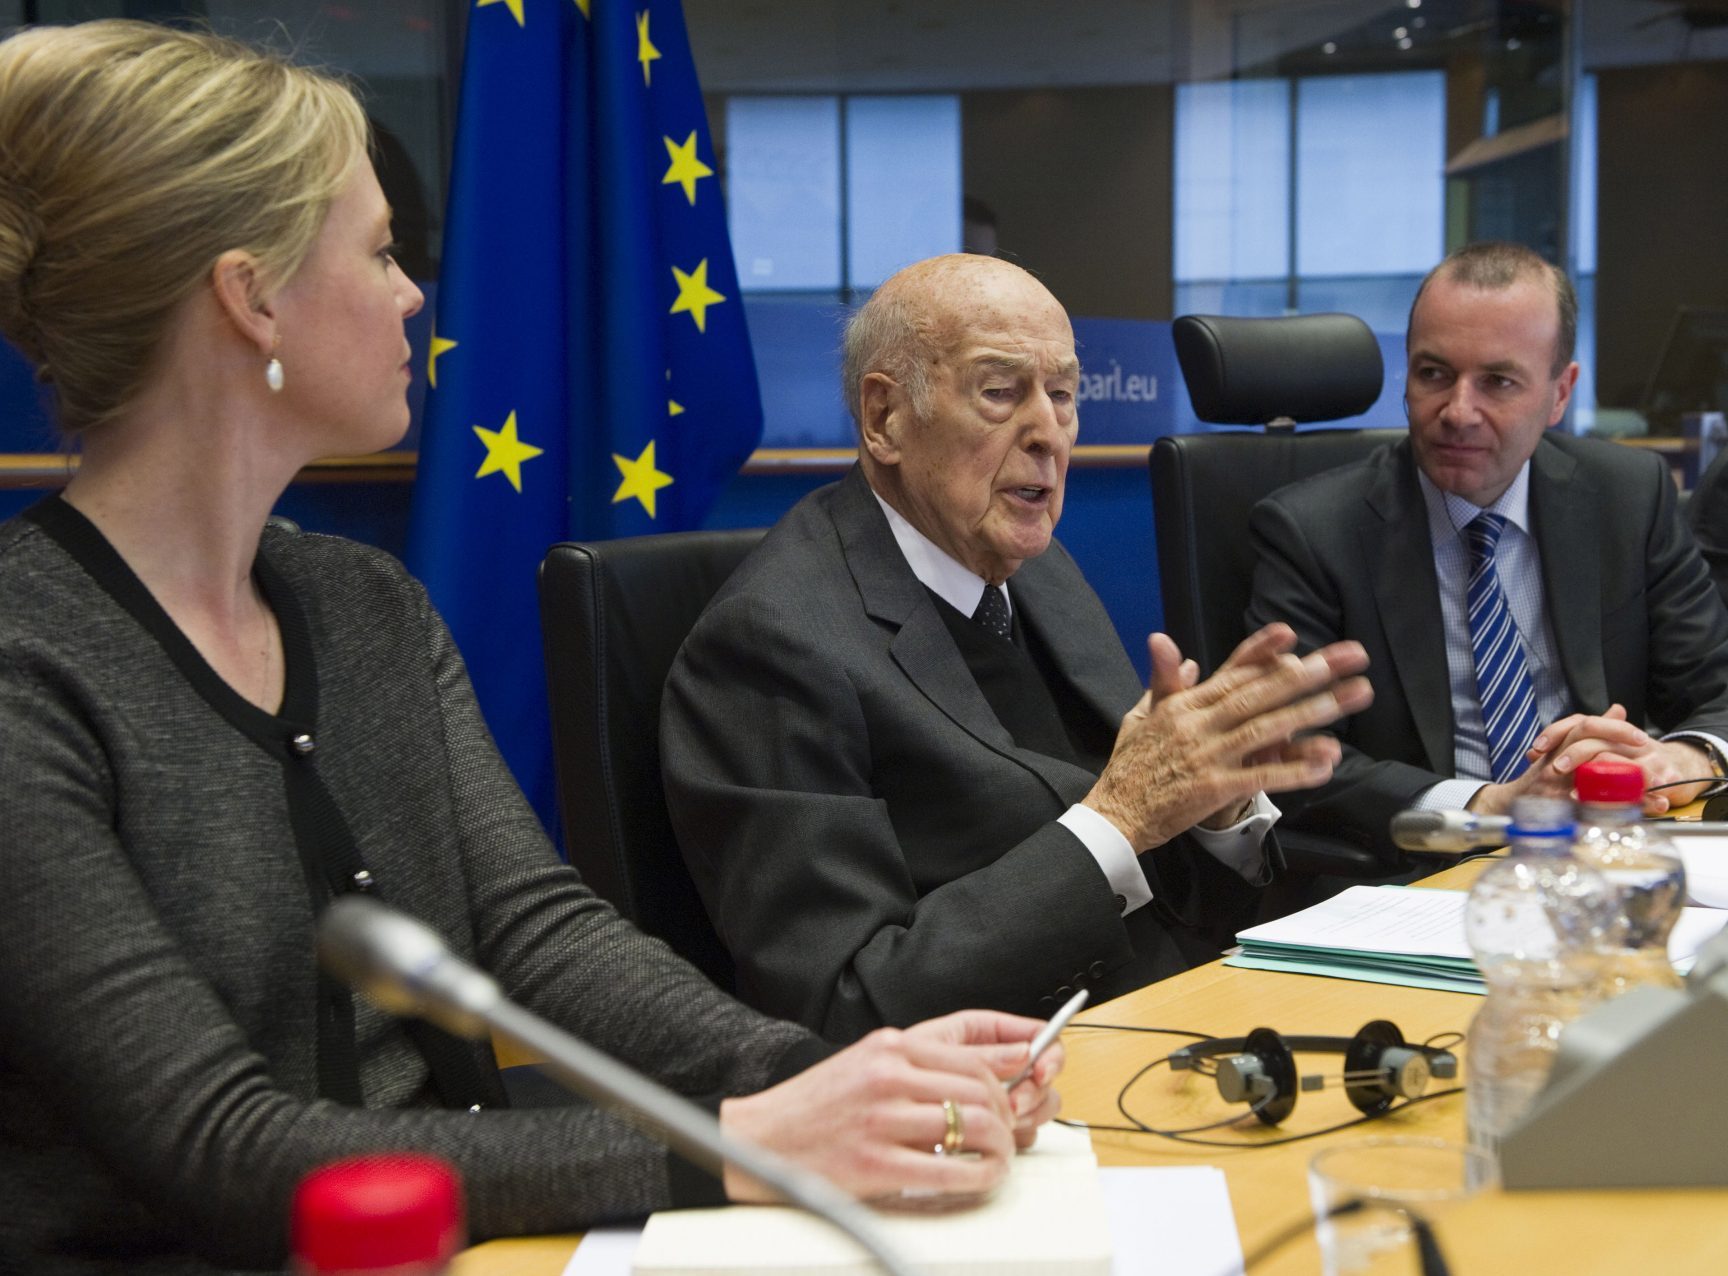 Giscard d'Estaign delivering a speech at the RIE launch meeting with Erika Widegren